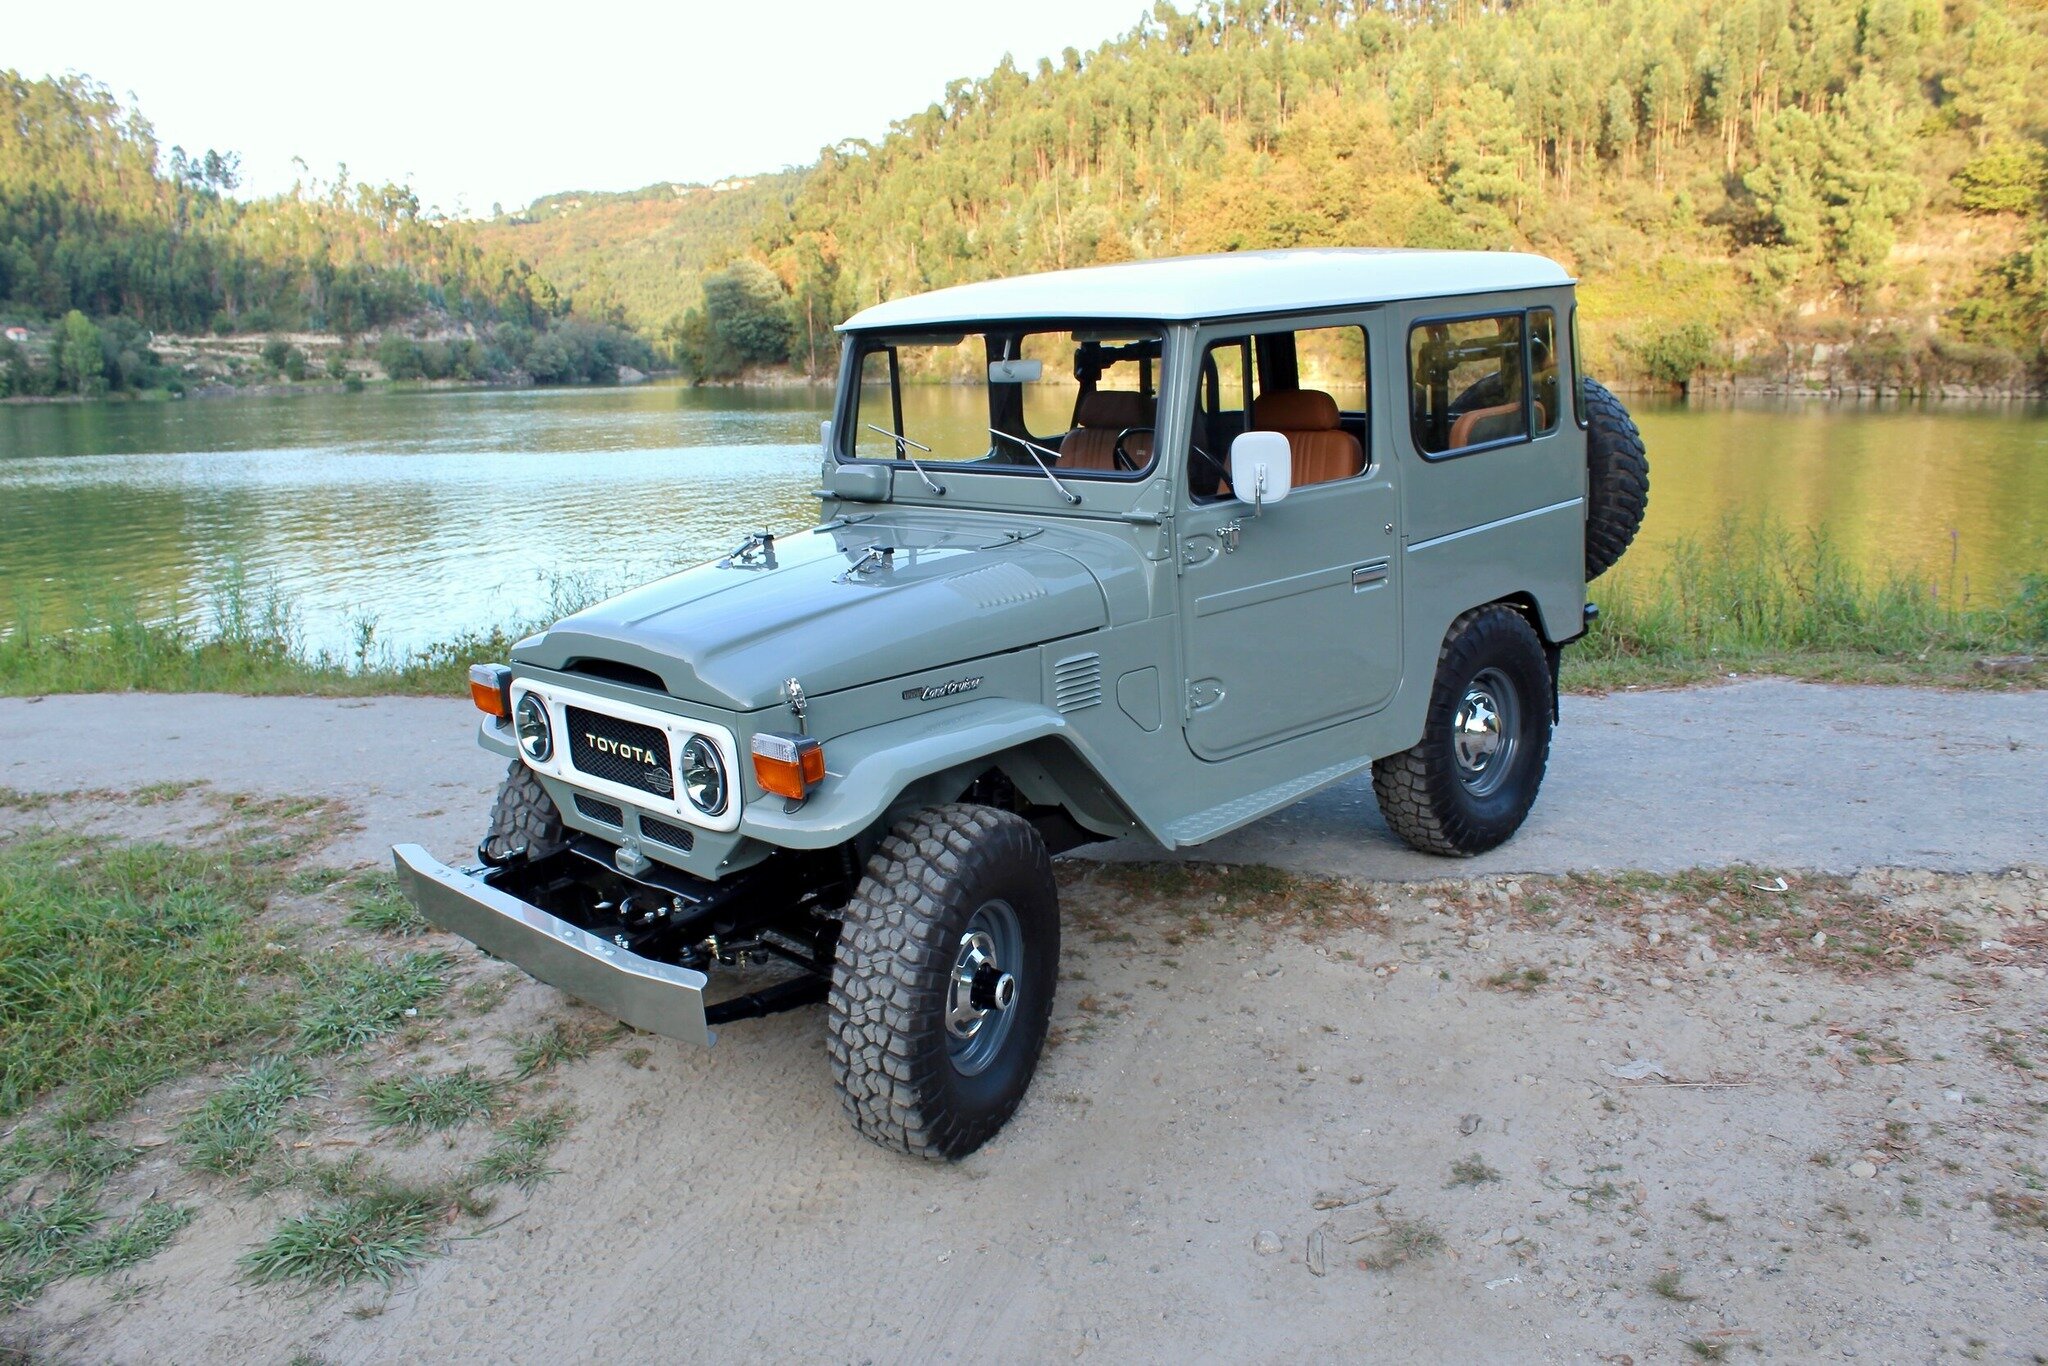 Our restored 1977 Toyota Land Cruiser FJ40 finds solace by the shimmering waters, a testament to adventure and tranquility.

#landcruiser #fj40 #toyota #tlc #landy #custom #restoration #handcrafted #classiccar #truck #bespoke #urban #classic #vintage